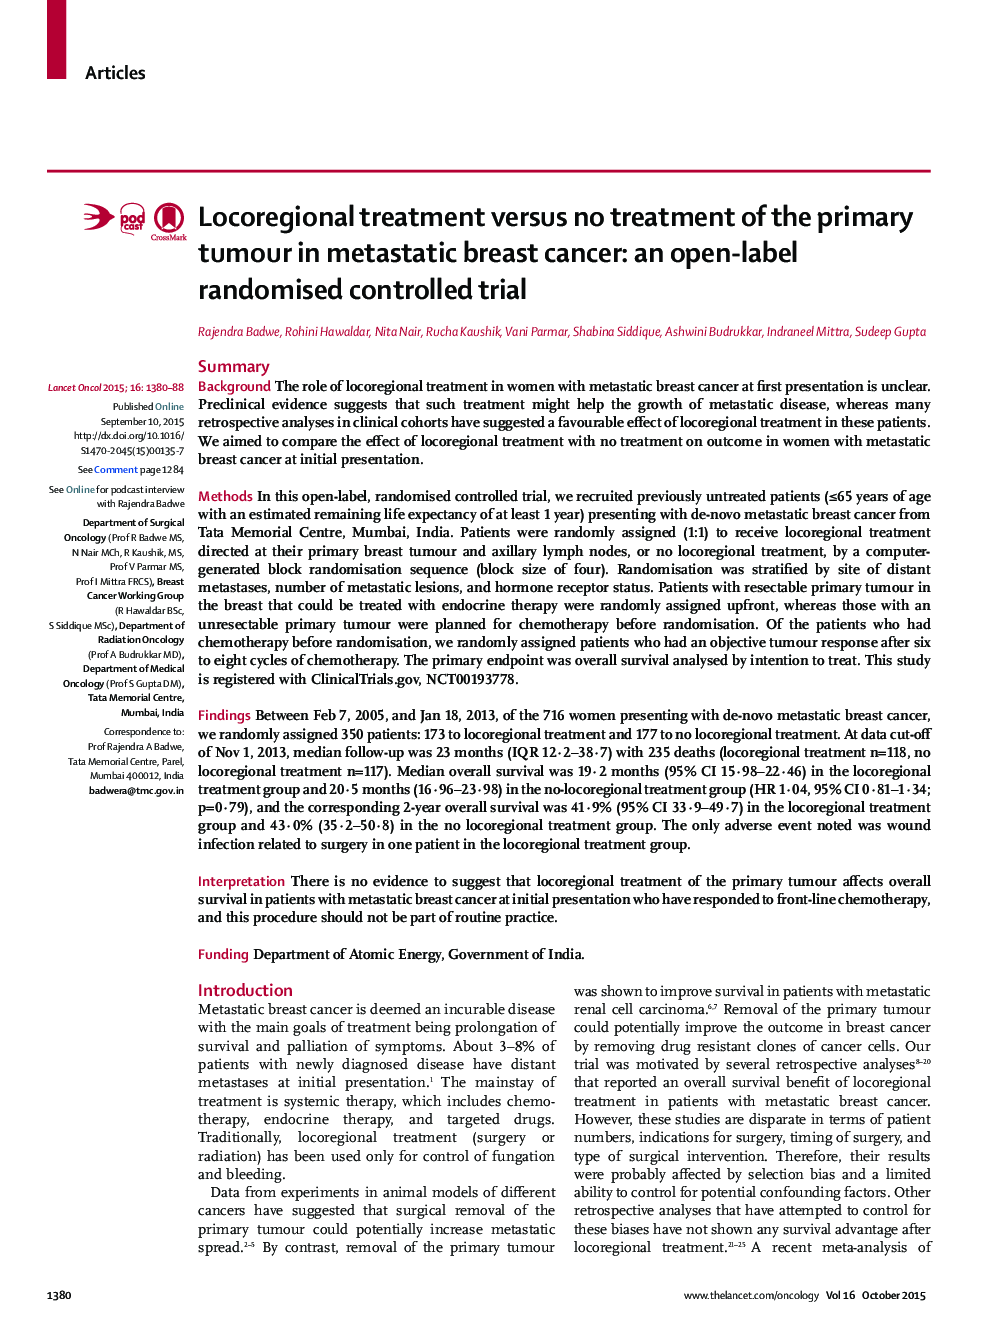 Locoregional treatment versus no treatment of the primary tumour in metastatic breast cancer: an open-label randomised controlled trial